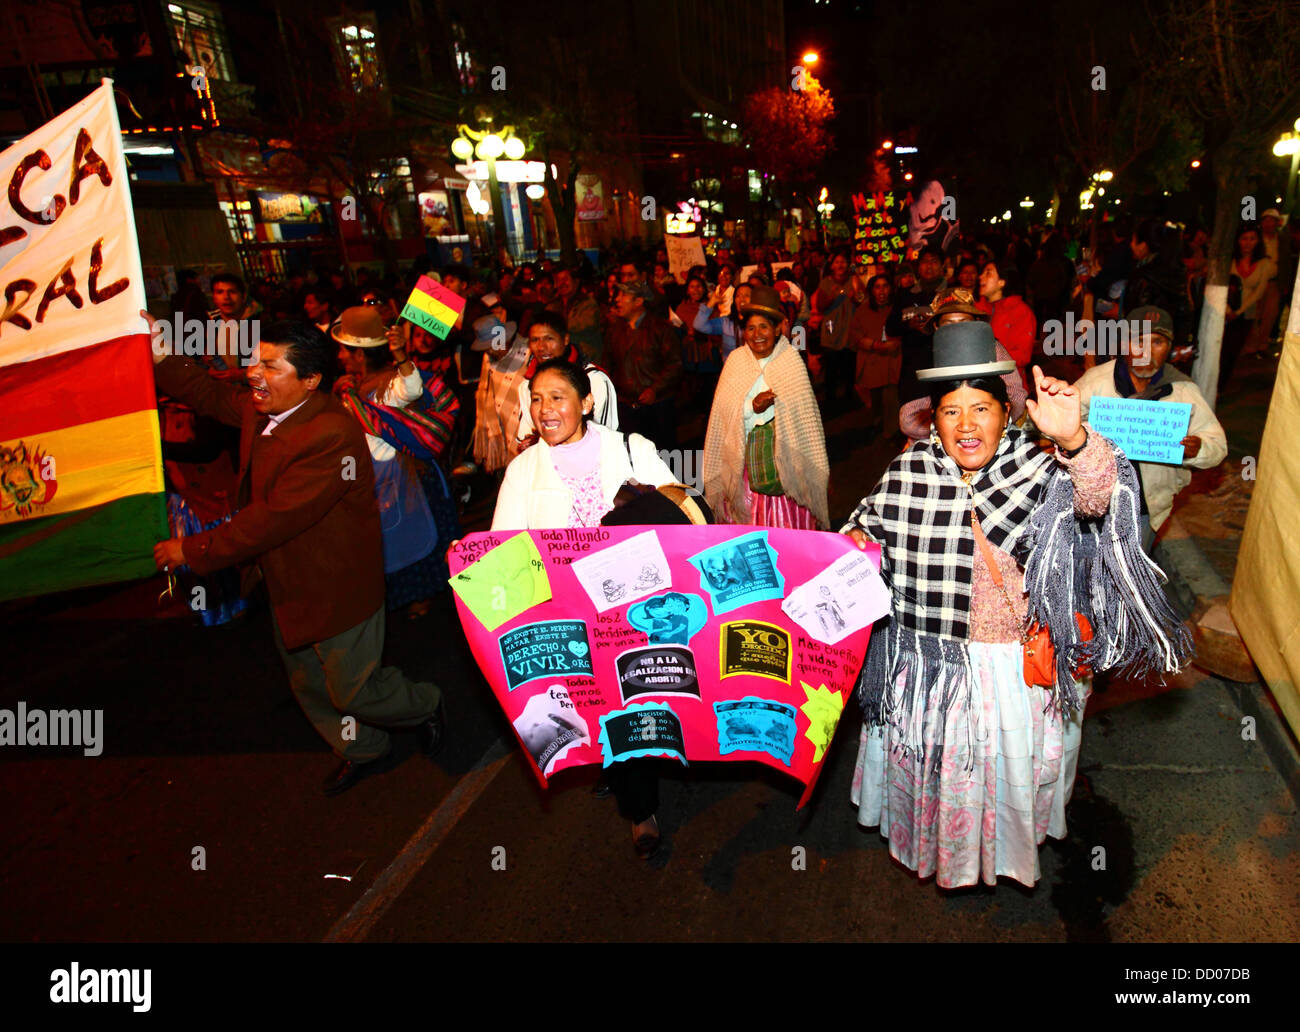 LA PAZ, BOLIVIA, 22nd August 2013. People take part in a march organised by the Red Pro-Vida (Pro Life Network) to protest against decriminalising abortion. Bolivia has been debating whether to decriminalise abortion since March 2012. Credit:  James Brunker / Alamy Live News Stock Photo